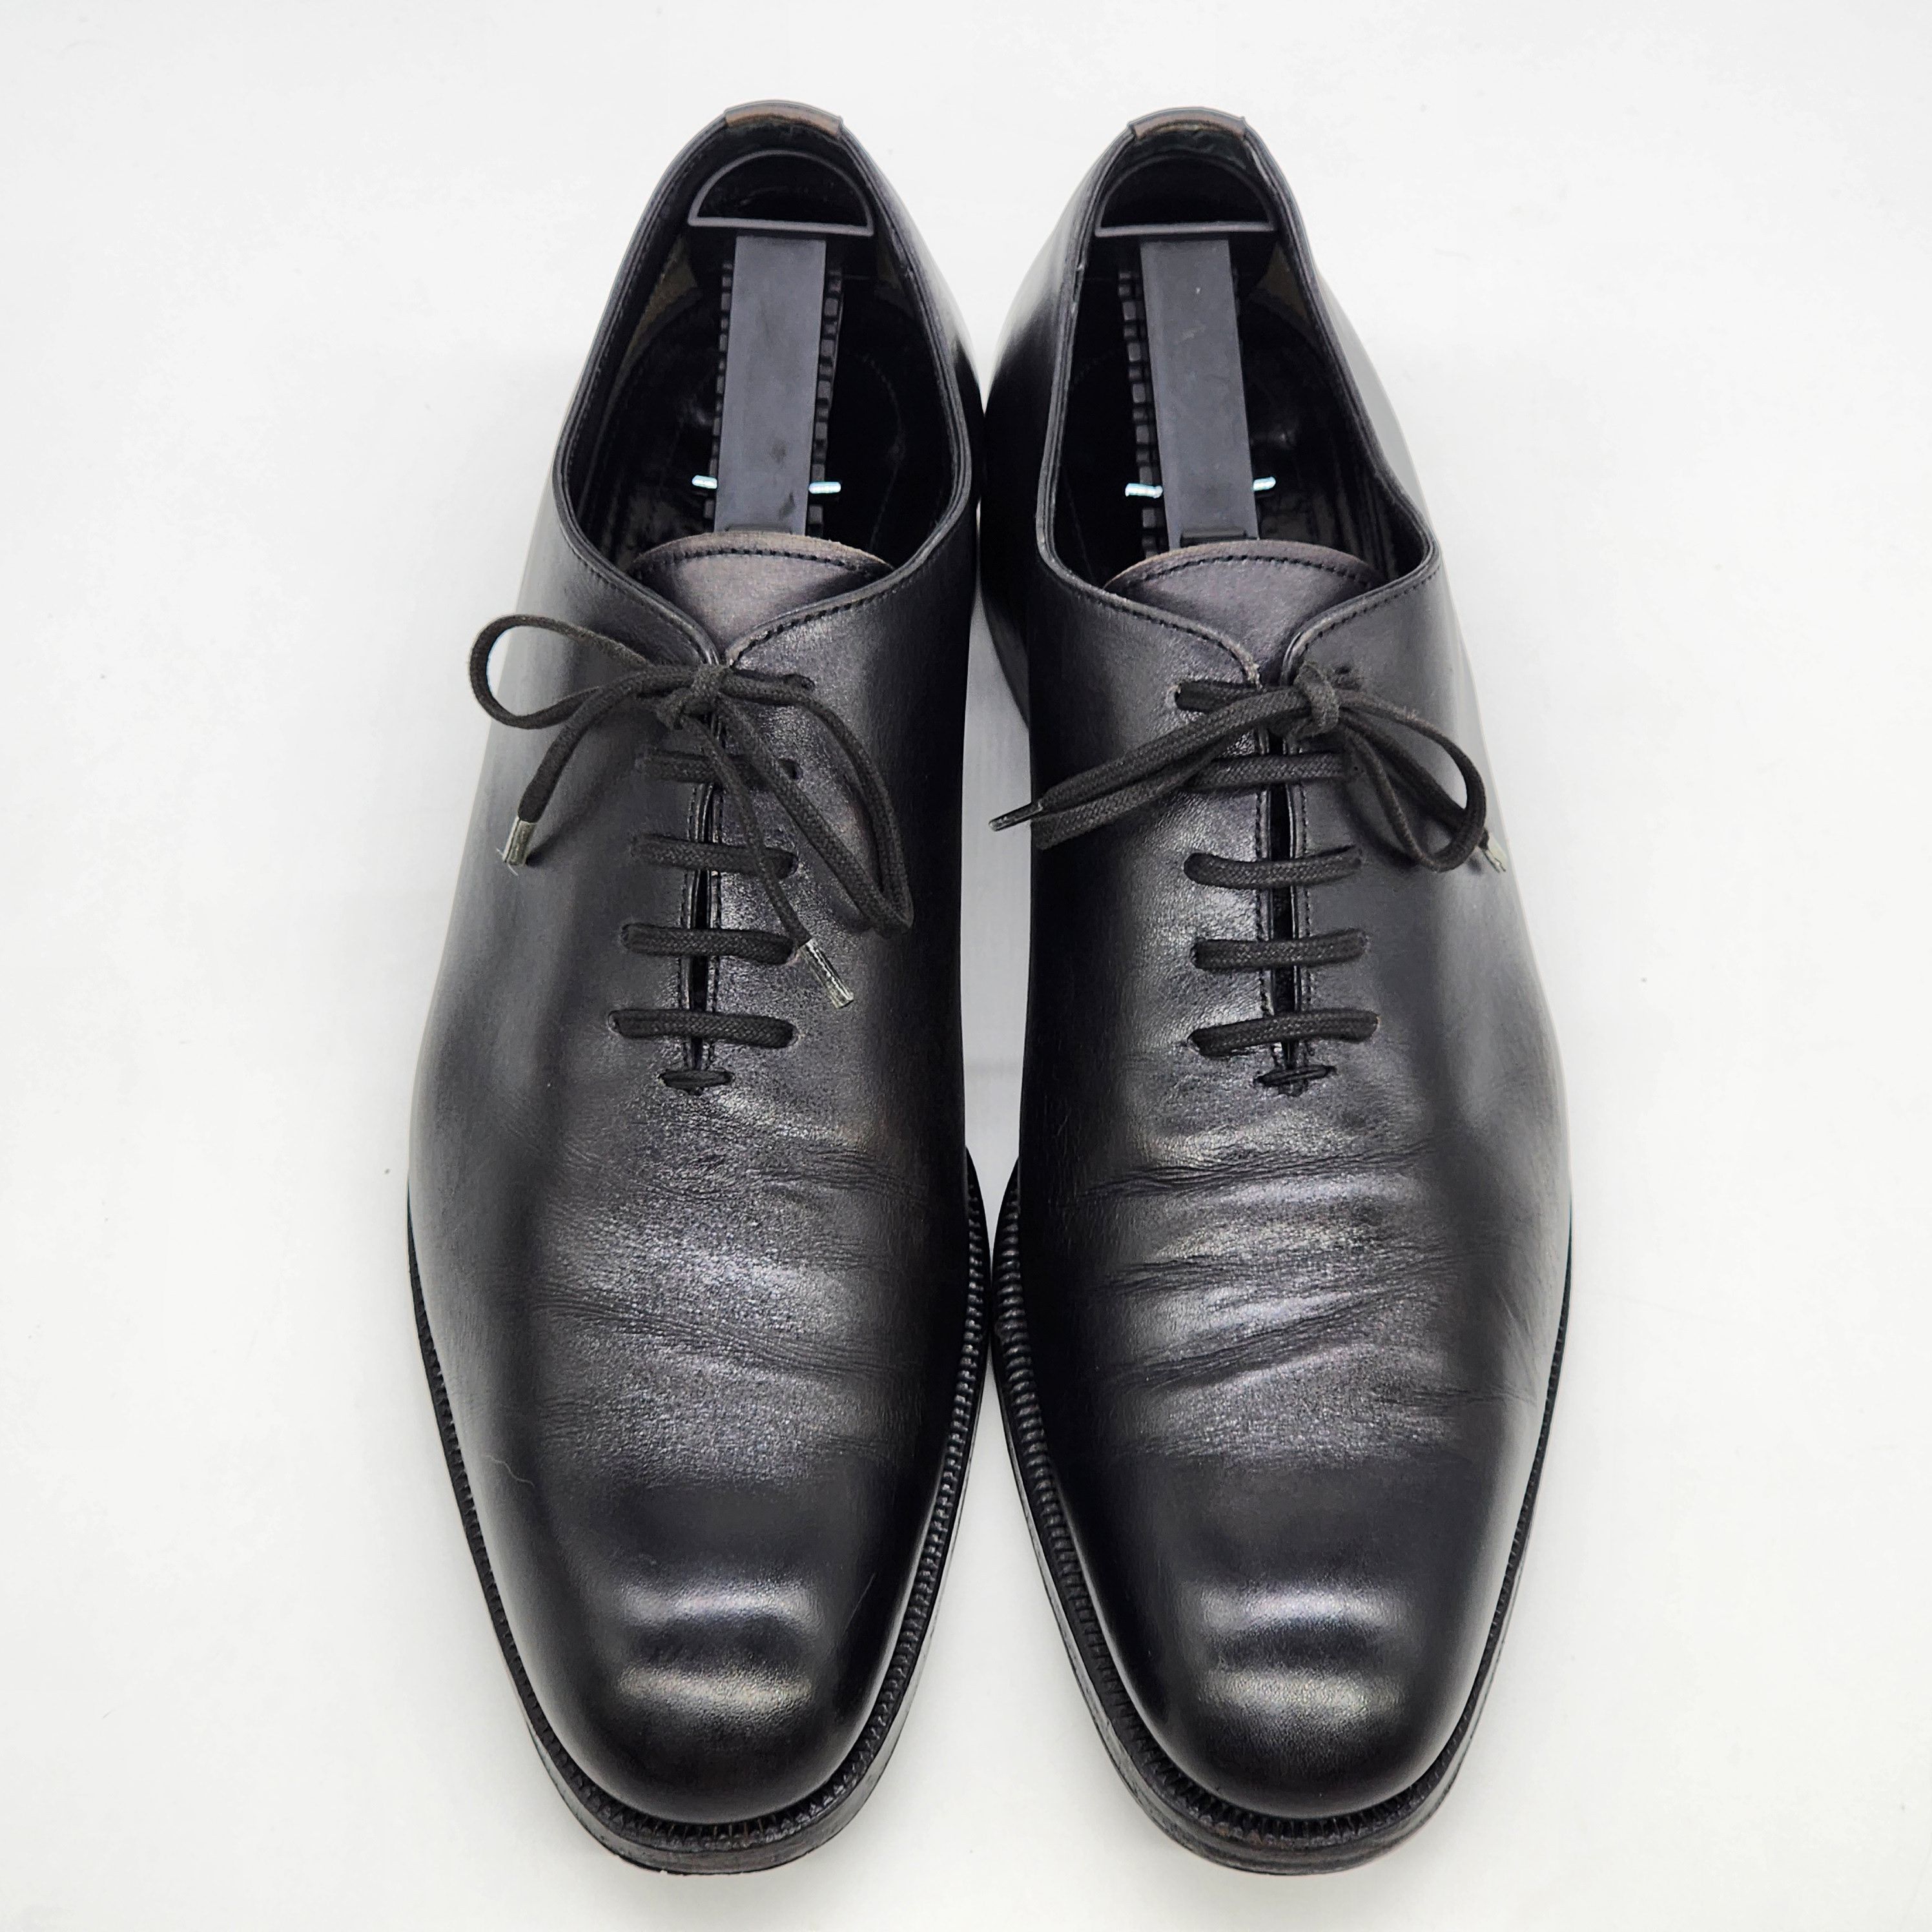 Tom Ford - Elkan Black Leather Whole-cut Oxford Shoes - 3